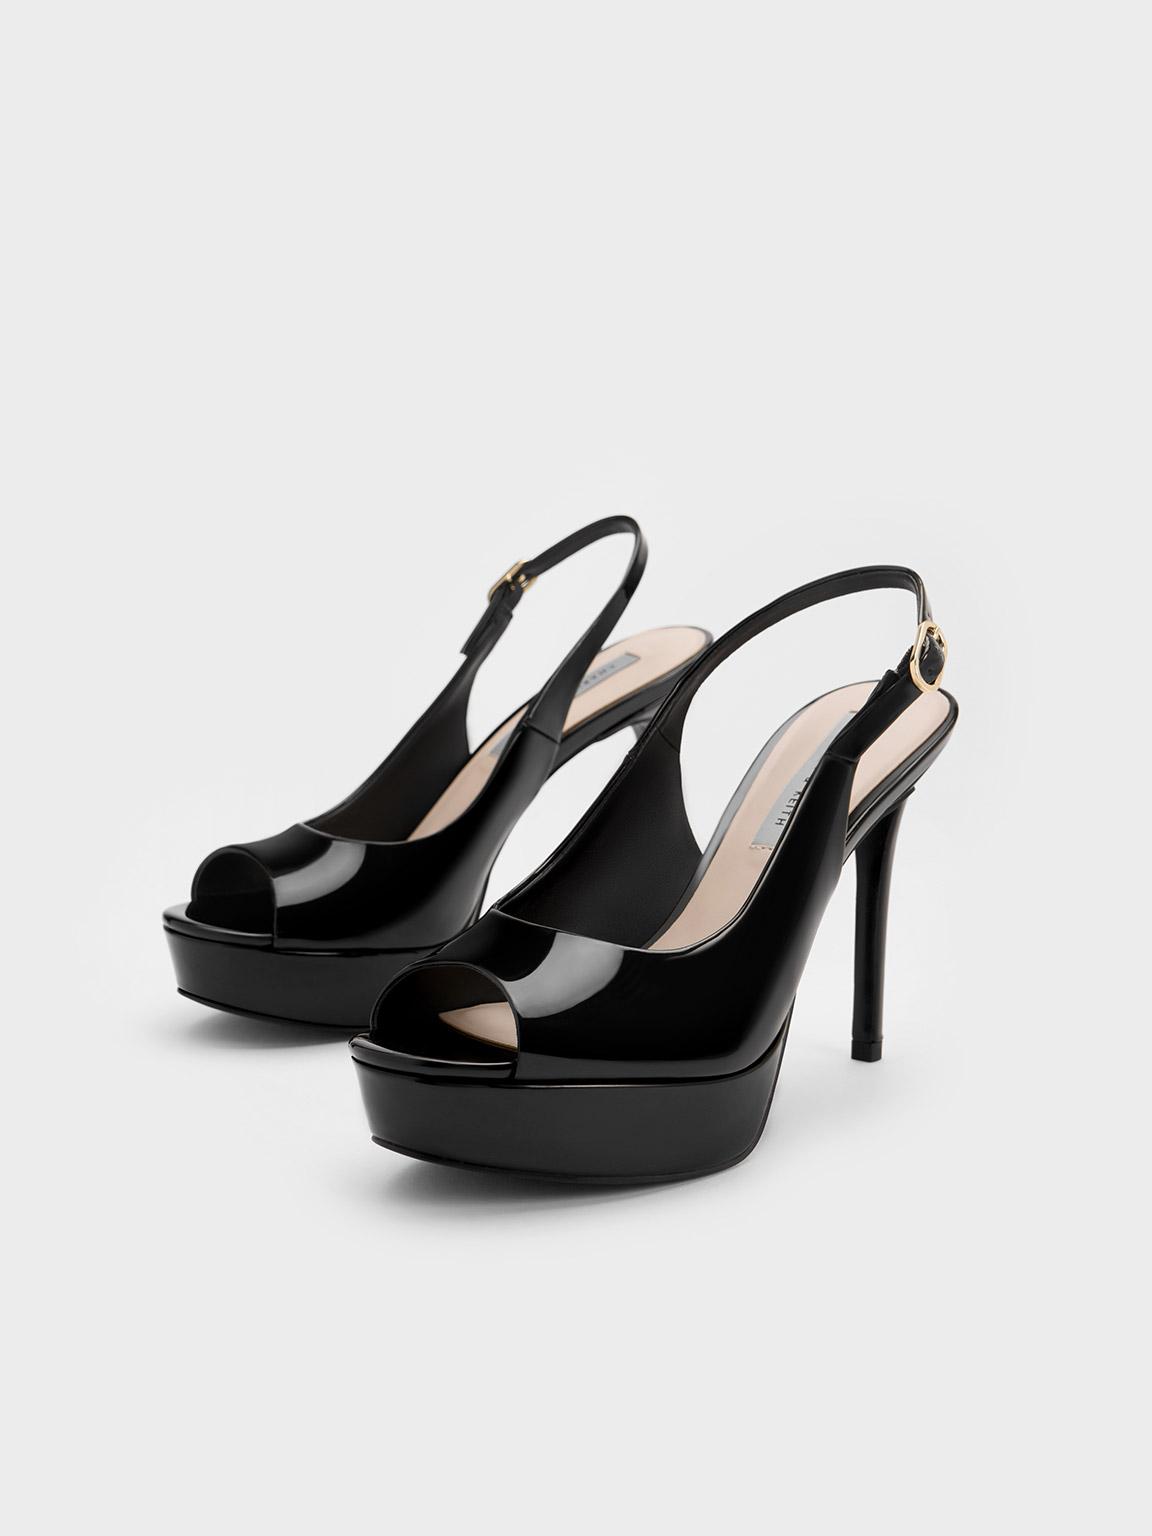 Charles & Keith - Women's Buckled Strap Slingback Pumps, Black, US 7